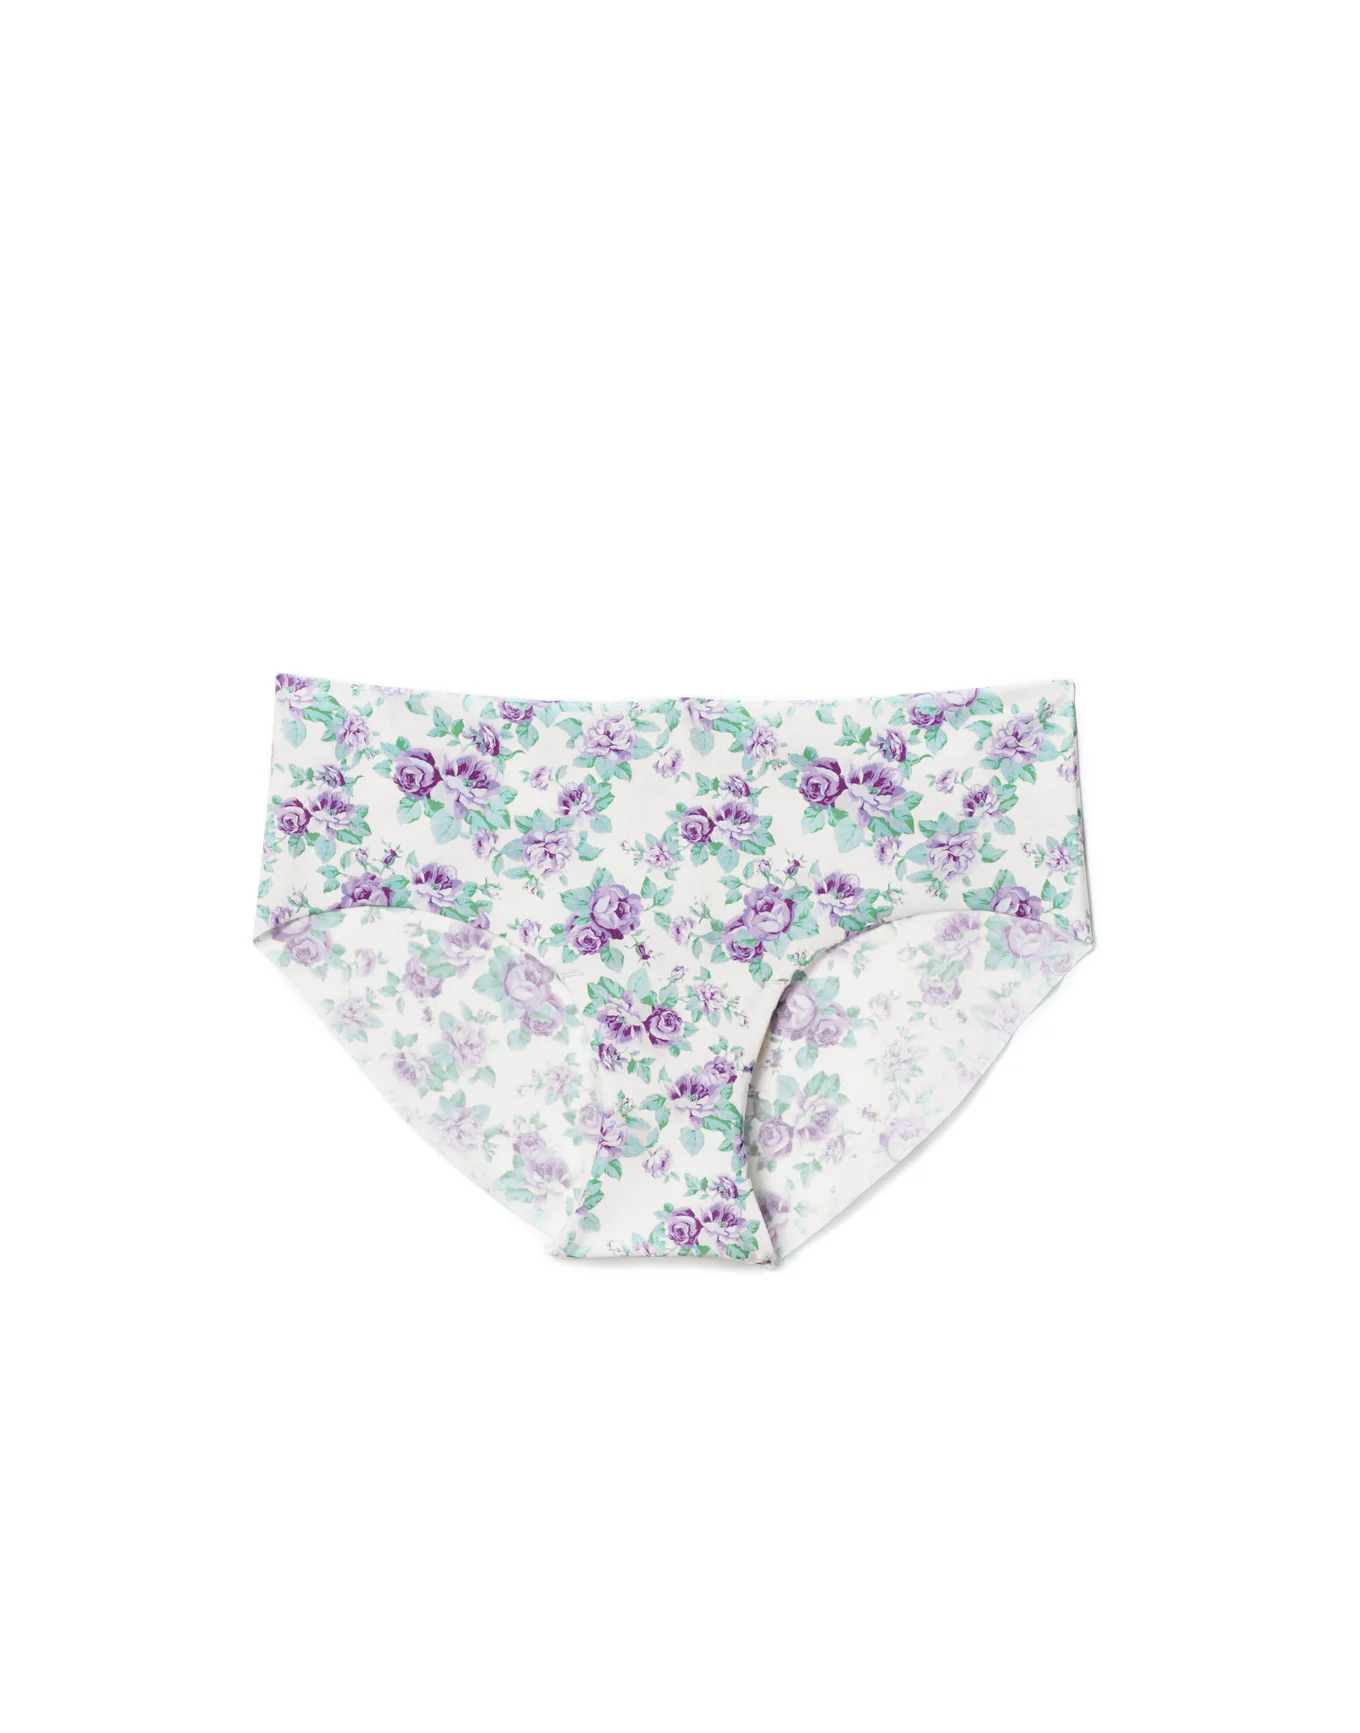 Leto Hipster Floral Purple 2 Plus Hipster, 2X | Adore Me